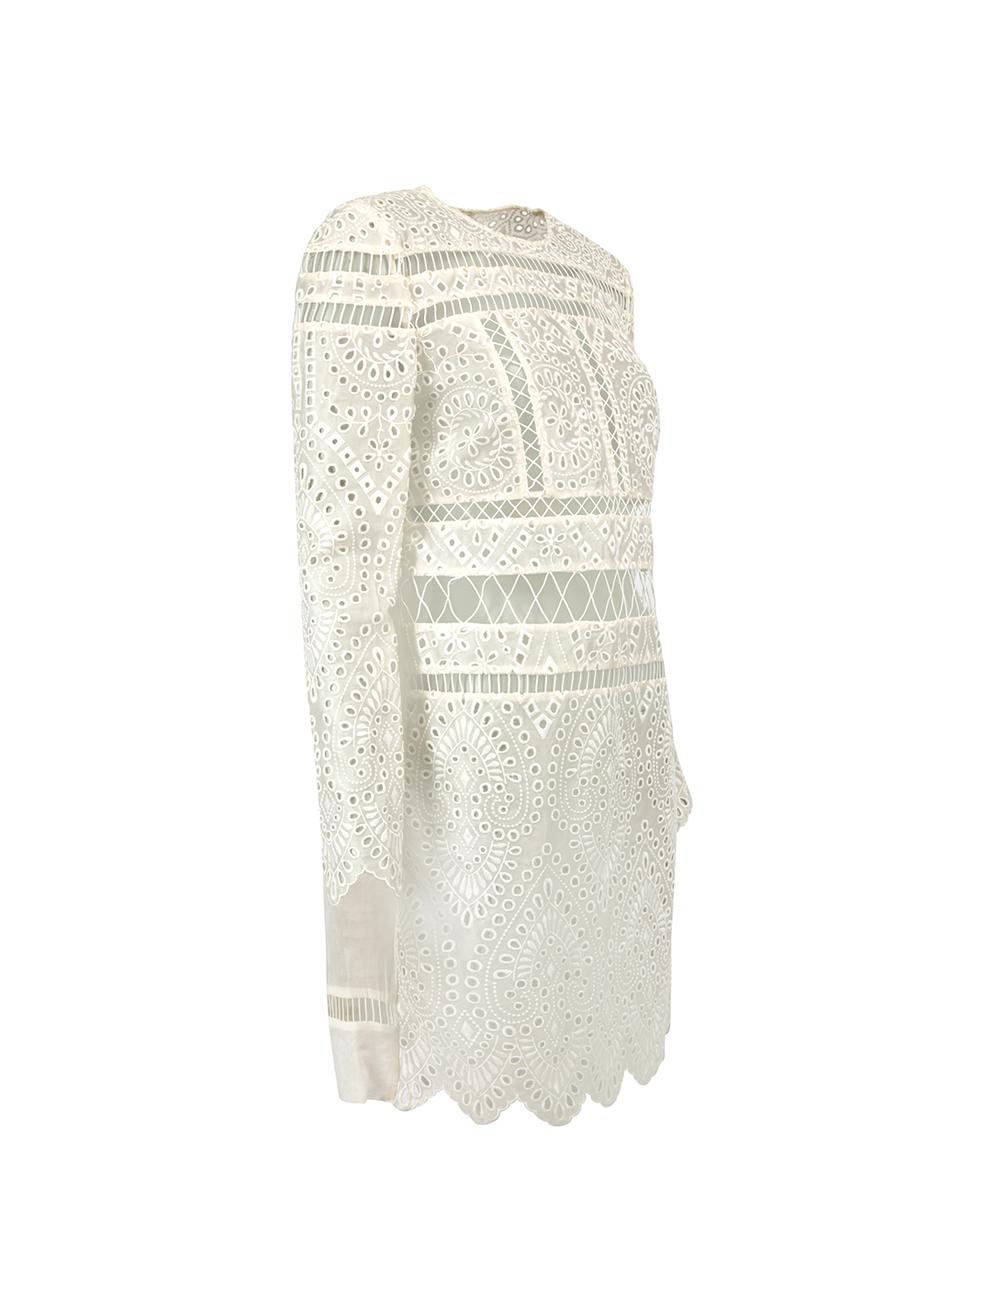 CONDITION is Very good. Minimal wear to dress is evident. Minimal wear to neckline lining with makeup marks on this used Zimmermann designer resale item.



Details


White

Silk

Broderie anglaise

See-through

Knee length dress

Long